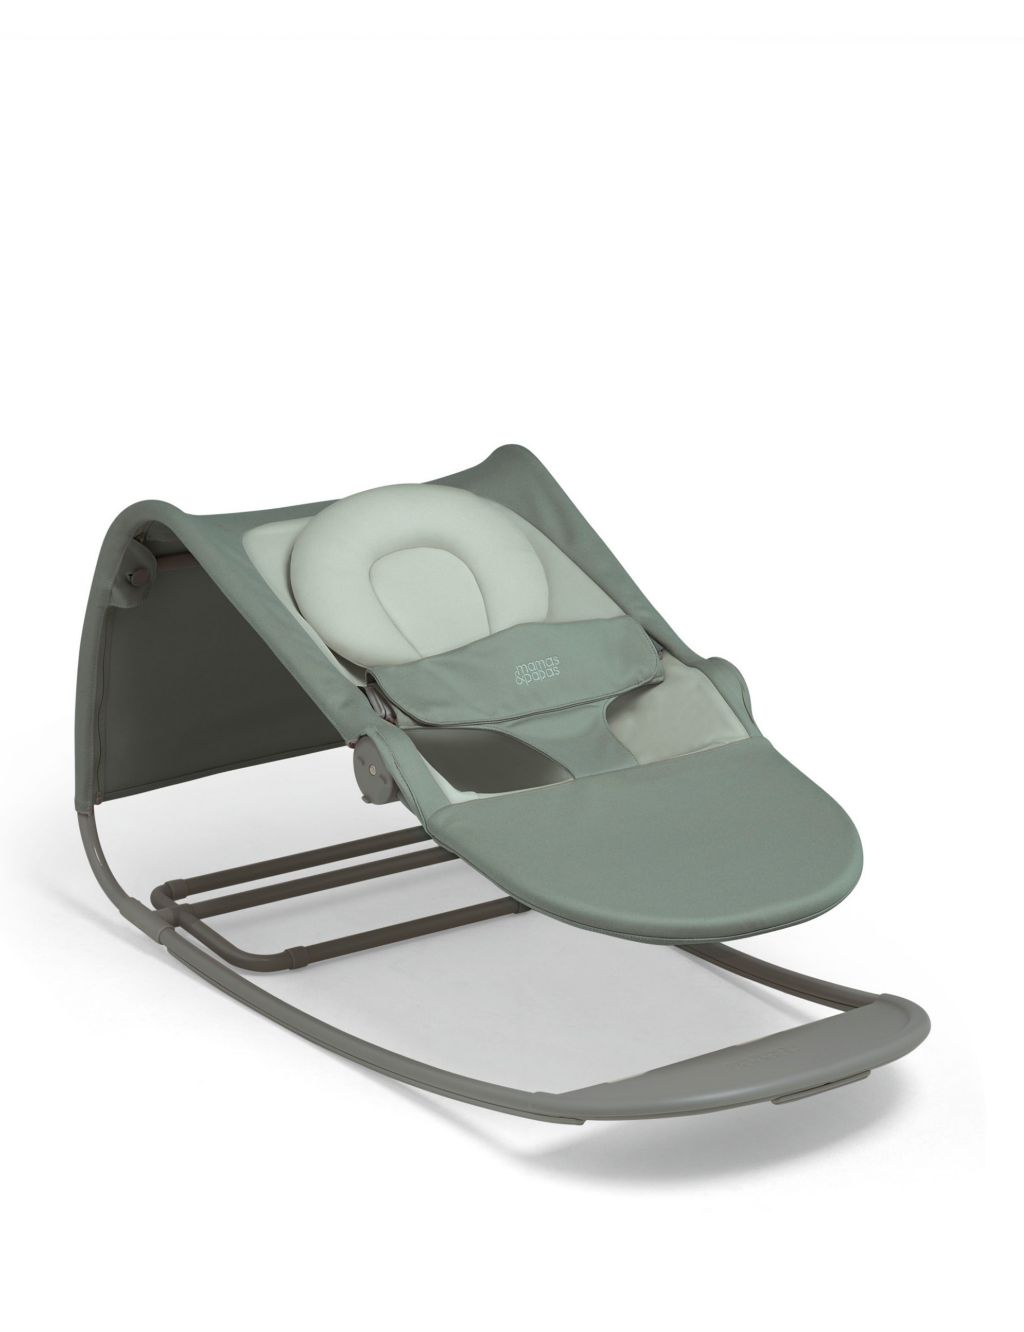 Tempo 3-in-1 Rocker Ivy Bouncer image 3